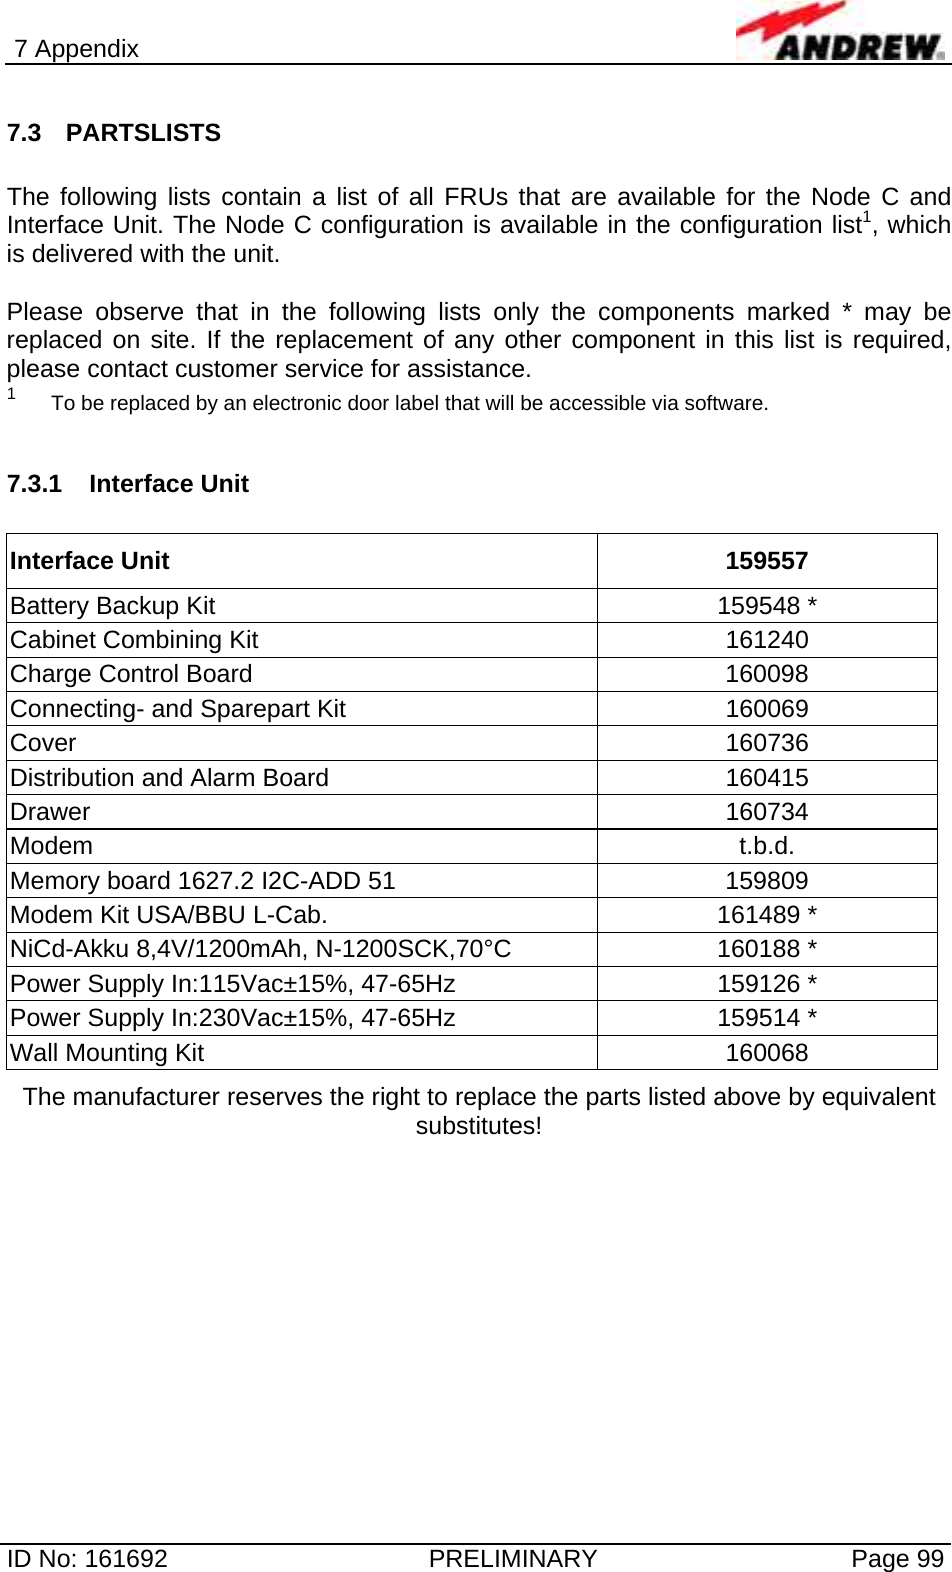 7 Appendix  ID No: 161692  PRELIMINARY  Page 99 7.3 PARTSLISTS  The following lists contain a list of all FRUs that are available for the Node C and Interface Unit. The Node C configuration is available in the configuration list1, which is delivered with the unit.   Please observe that in the following lists only the components marked * may be replaced on site. If the replacement of any other component in this list is required, please contact customer service for assistance. 1  To be replaced by an electronic door label that will be accessible via software.  7.3.1 Interface Unit  Interface Unit 159557 Battery Backup Kit  159548 * Cabinet Combining Kit  161240 Charge Control Board  160098 Connecting- and Sparepart Kit  160069 Cover 160736 Distribution and Alarm Board  160415 Drawer 160734 Modem t.b.d. Memory board 1627.2 I2C-ADD 51  159809 Modem Kit USA/BBU L-Cab.  161489 * NiCd-Akku 8,4V/1200mAh, N-1200SCK,70°C  160188 * Power Supply In:115Vac±15%, 47-65Hz  159126 * Power Supply In:230Vac±15%, 47-65Hz  159514 * Wall Mounting Kit  160068 The manufacturer reserves the right to replace the parts listed above by equivalent substitutes!  